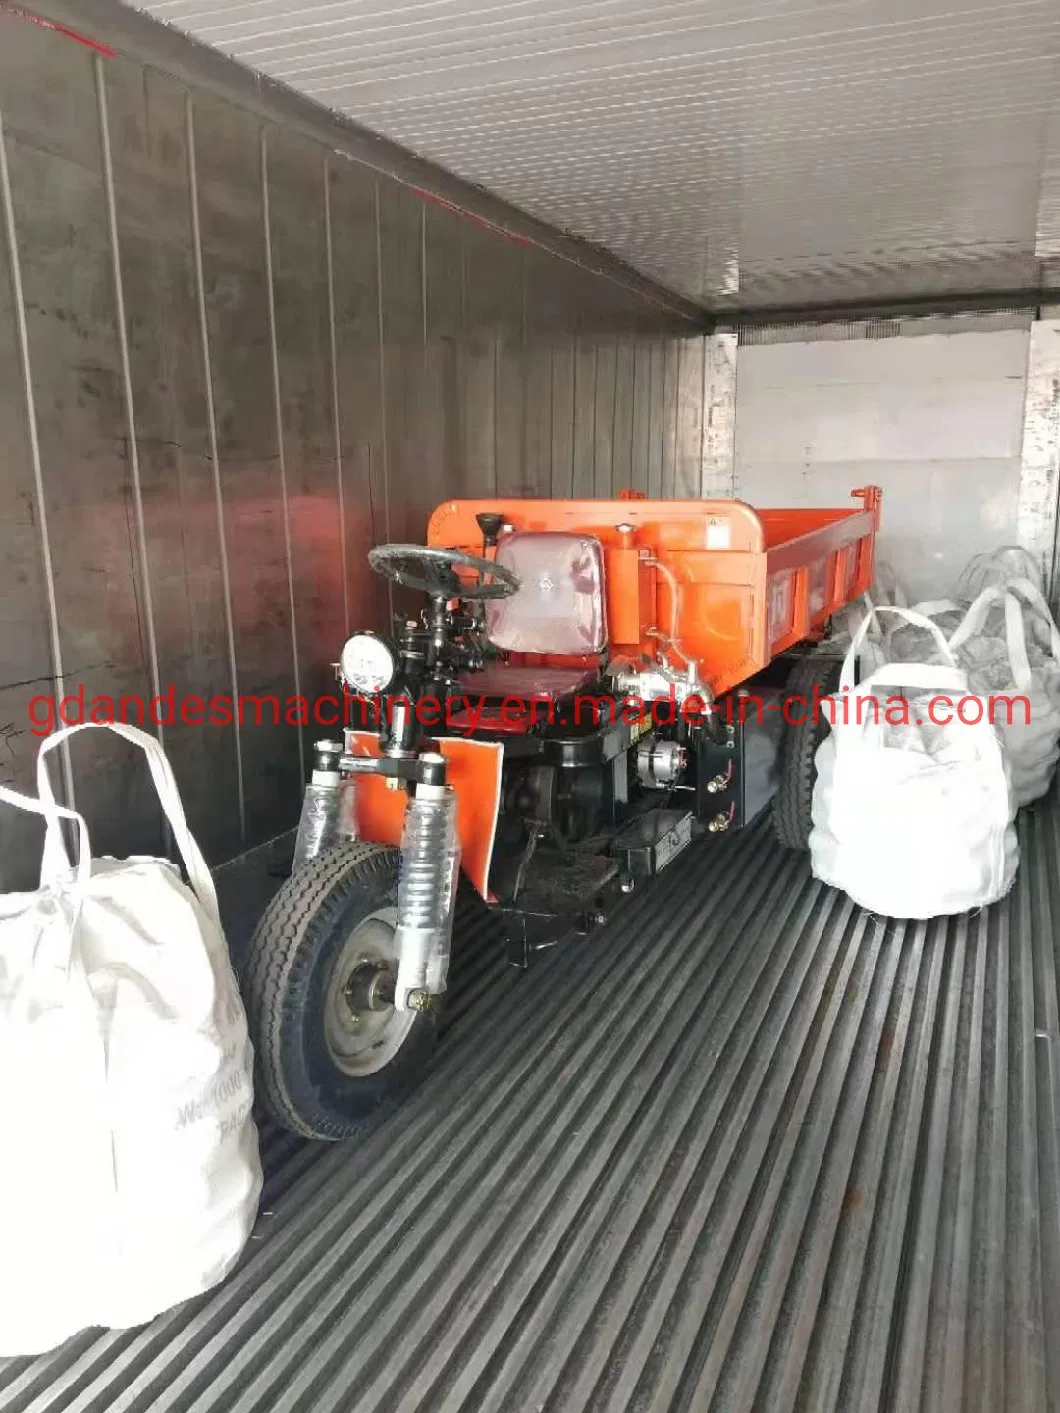 Factory Tricycle 200cc Three Wheel Tricycle Gasoline Tricycle Motorcycle Cargo Loader 3 Wheel Truck Air Coold Tricycle Gudao Andes